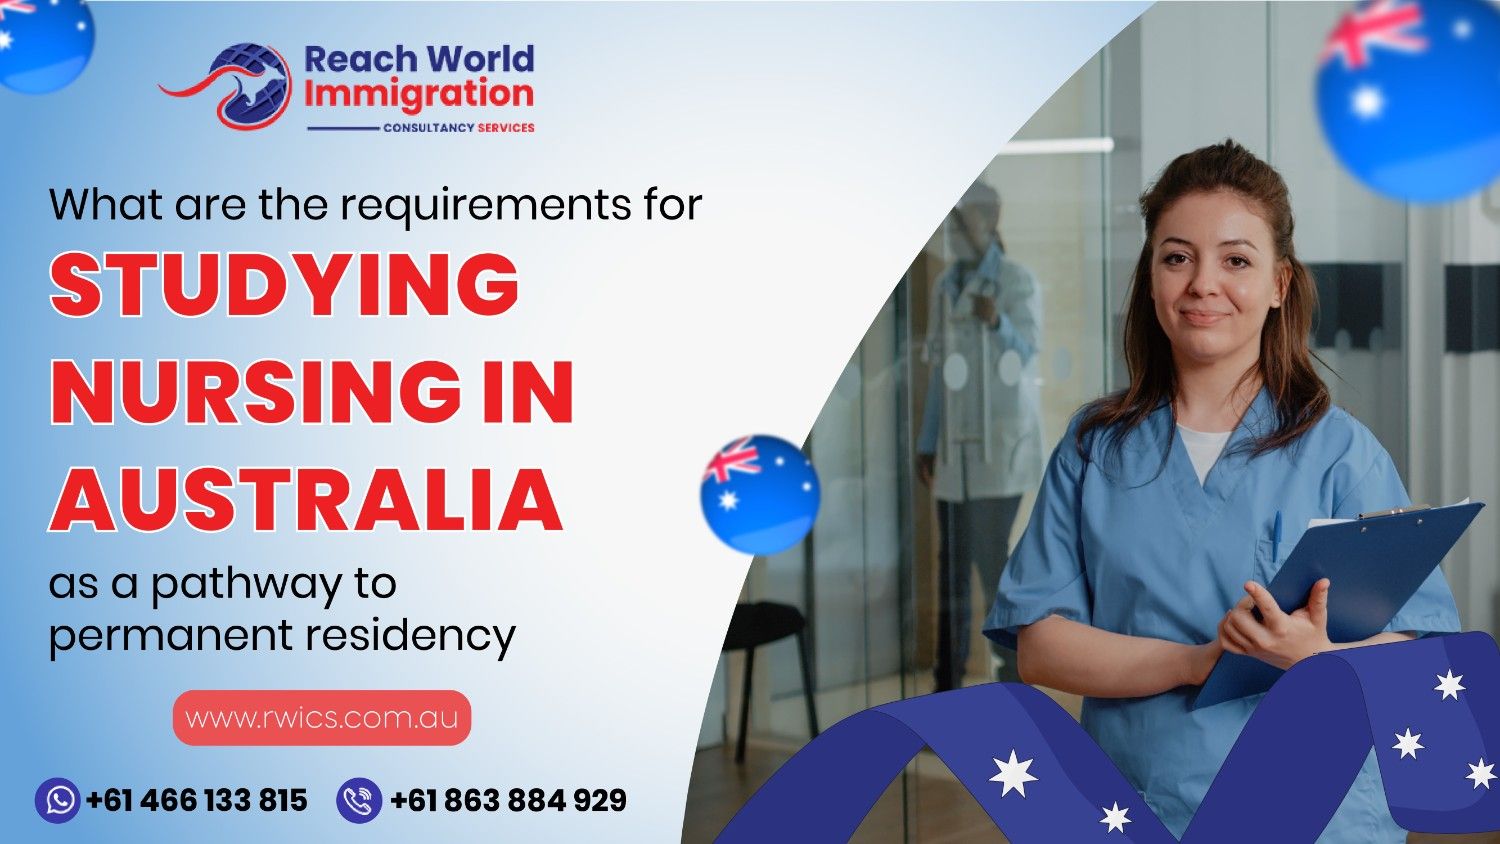 What Are The Requirements For Studying Nursing In Australia As A pathway To Permanent Residency